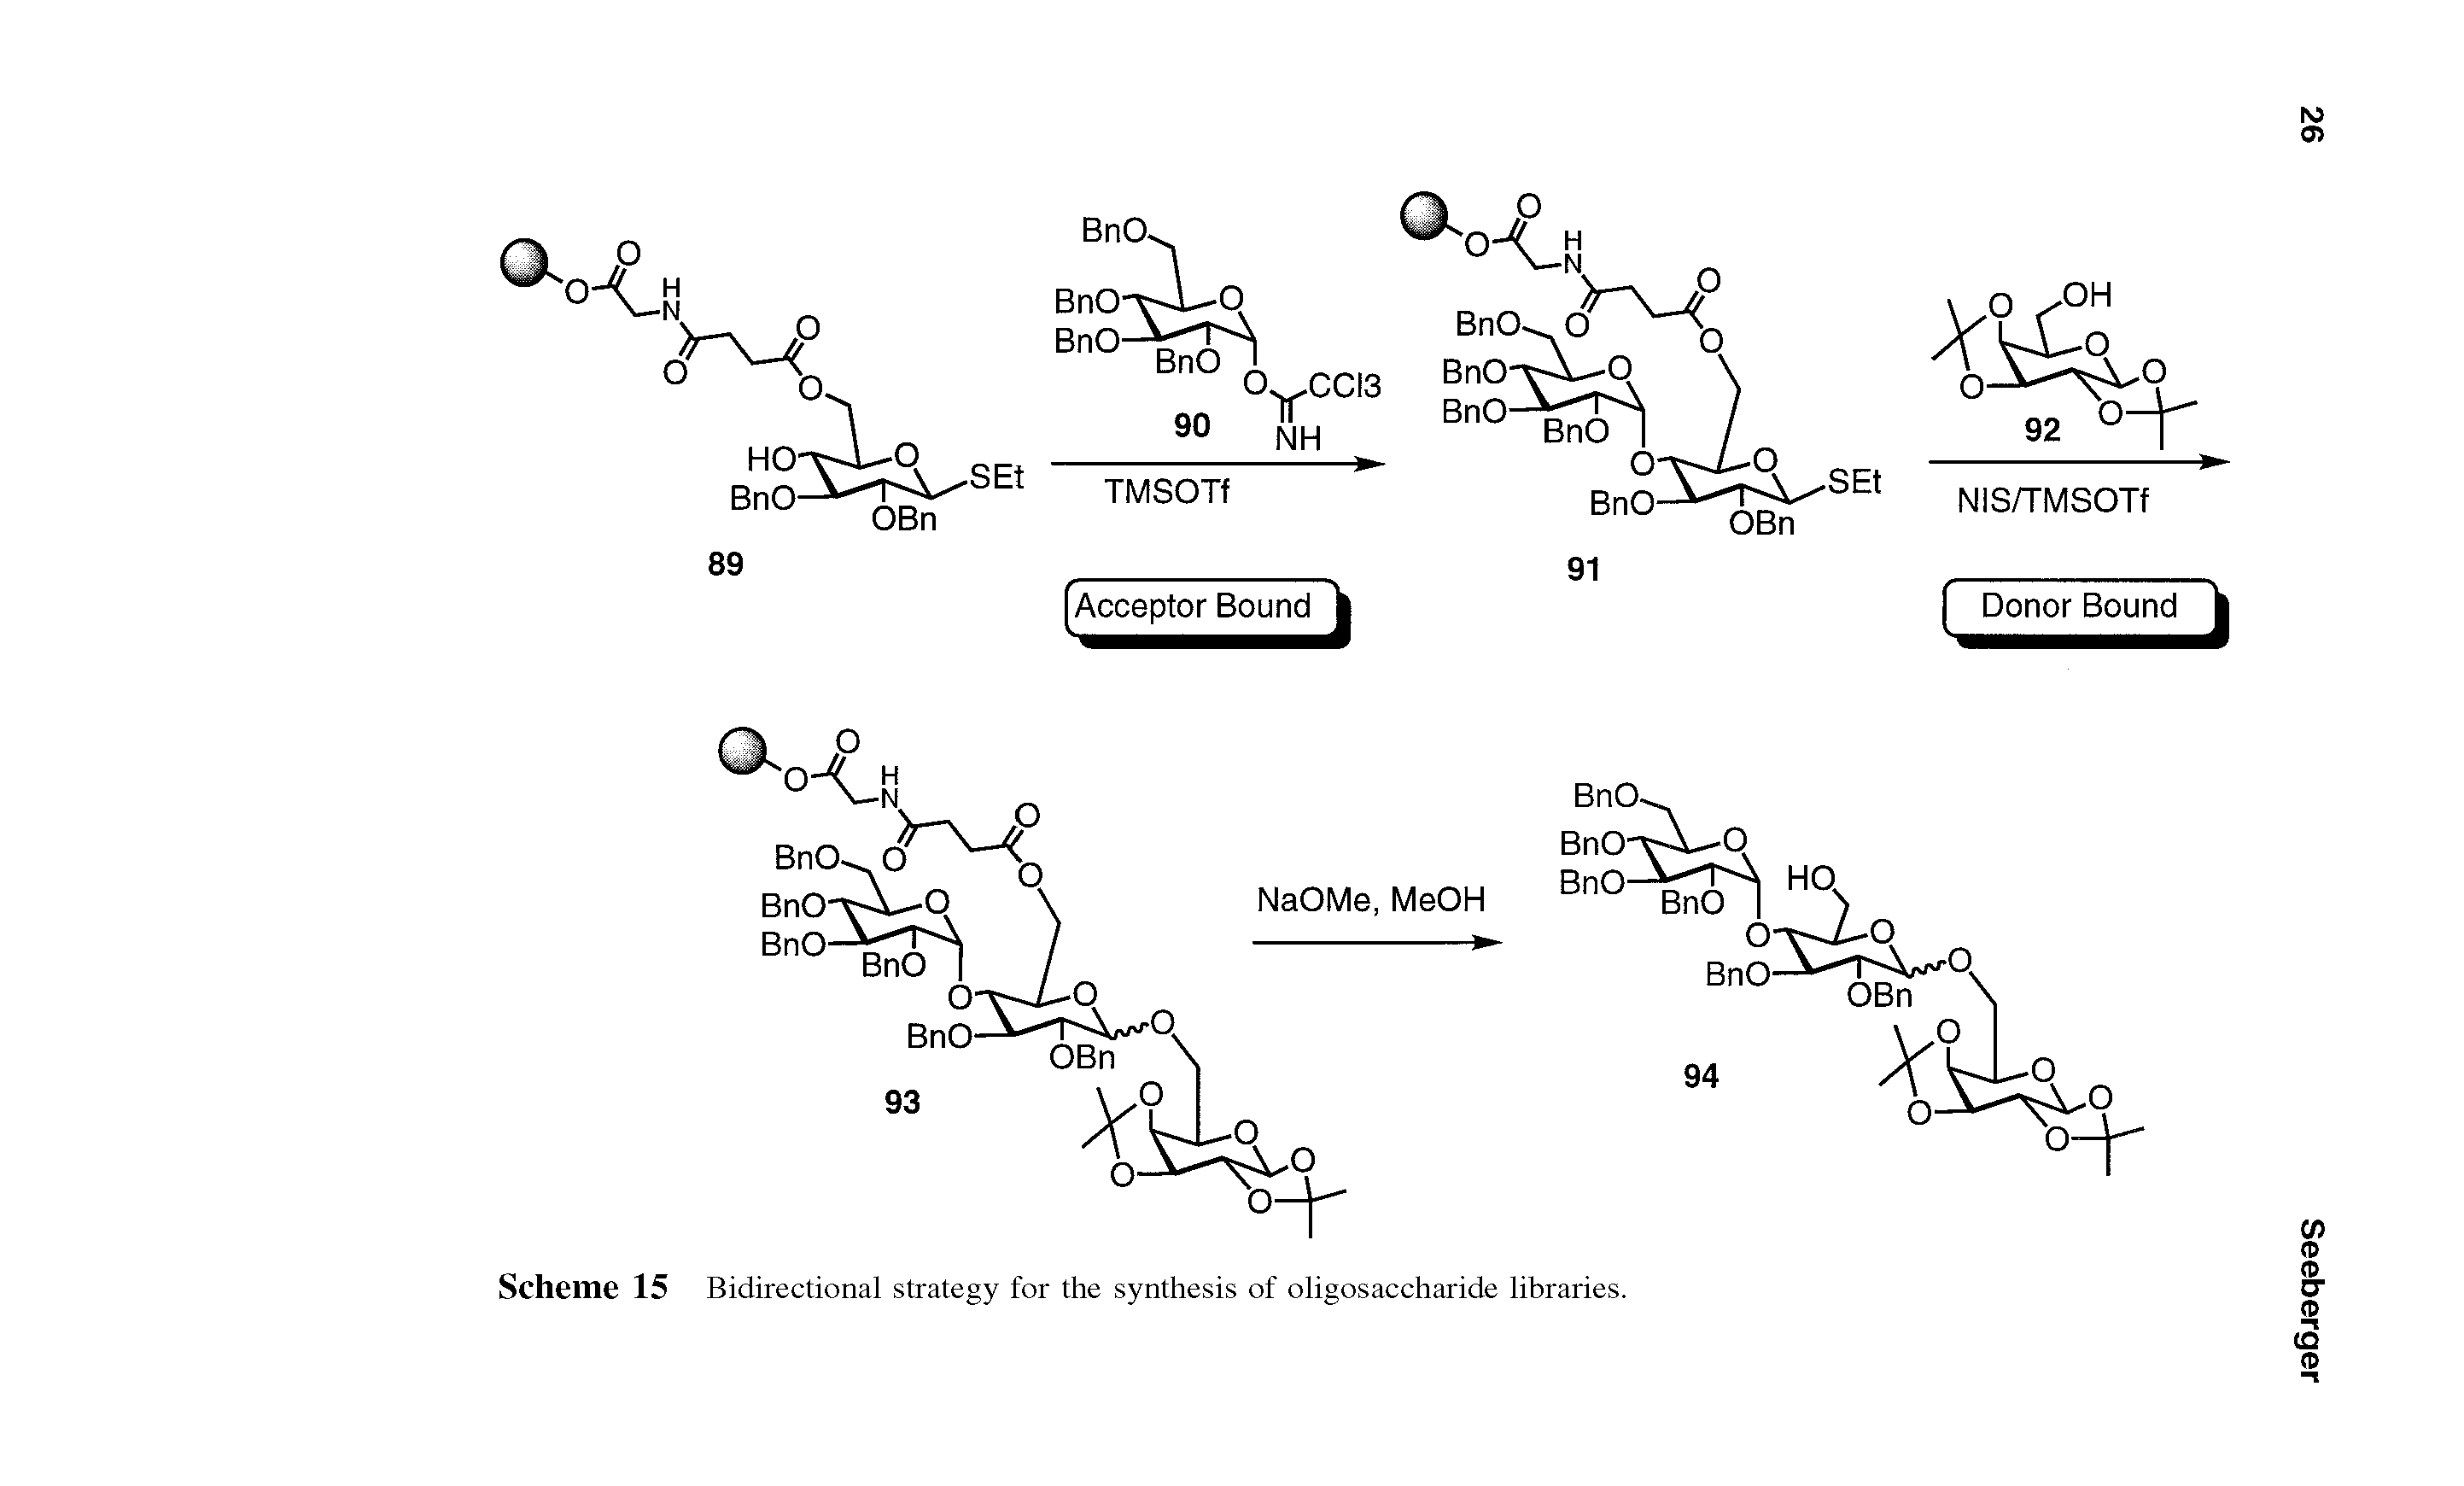 Scheme 15 Bidirectional strategy for the synthesis of oligosaccharide libraries.